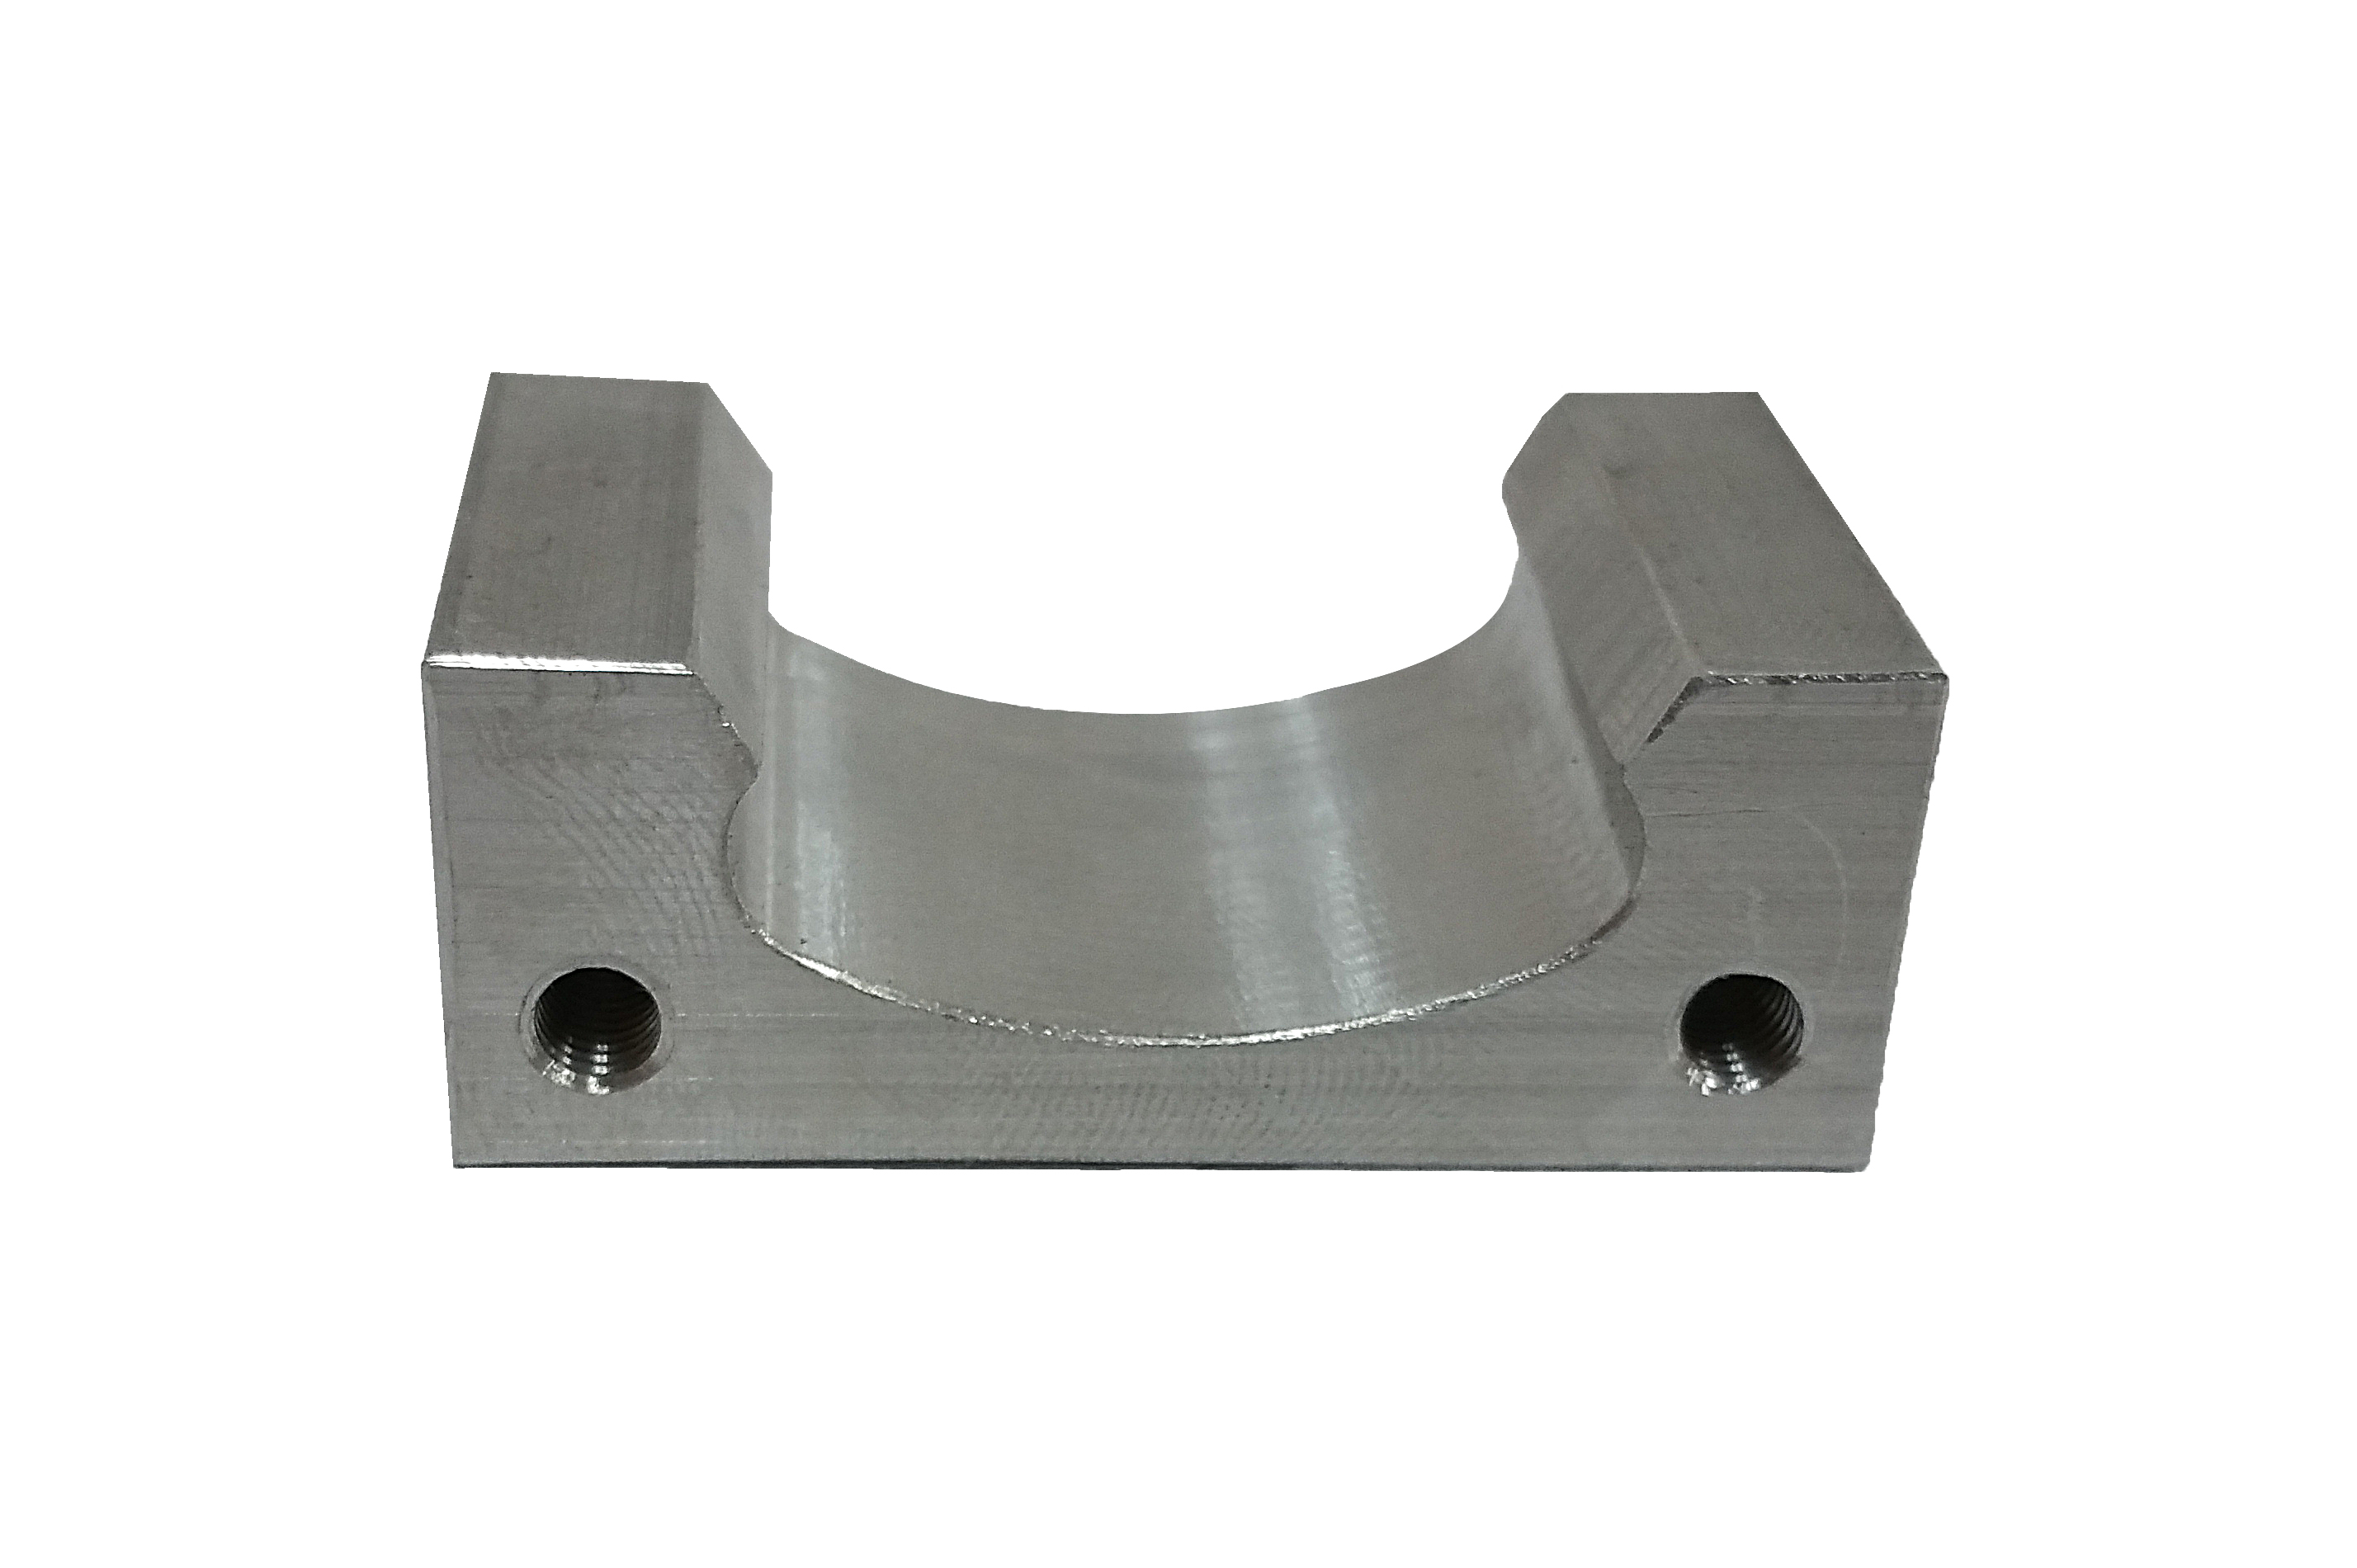 Machined Part - Aluminum bar machined to ¾ in. x 2 in. x 1 ⅛ in. LG. with elliptical-shaped open cut out and (2) #10-32 drilled and tapped holes